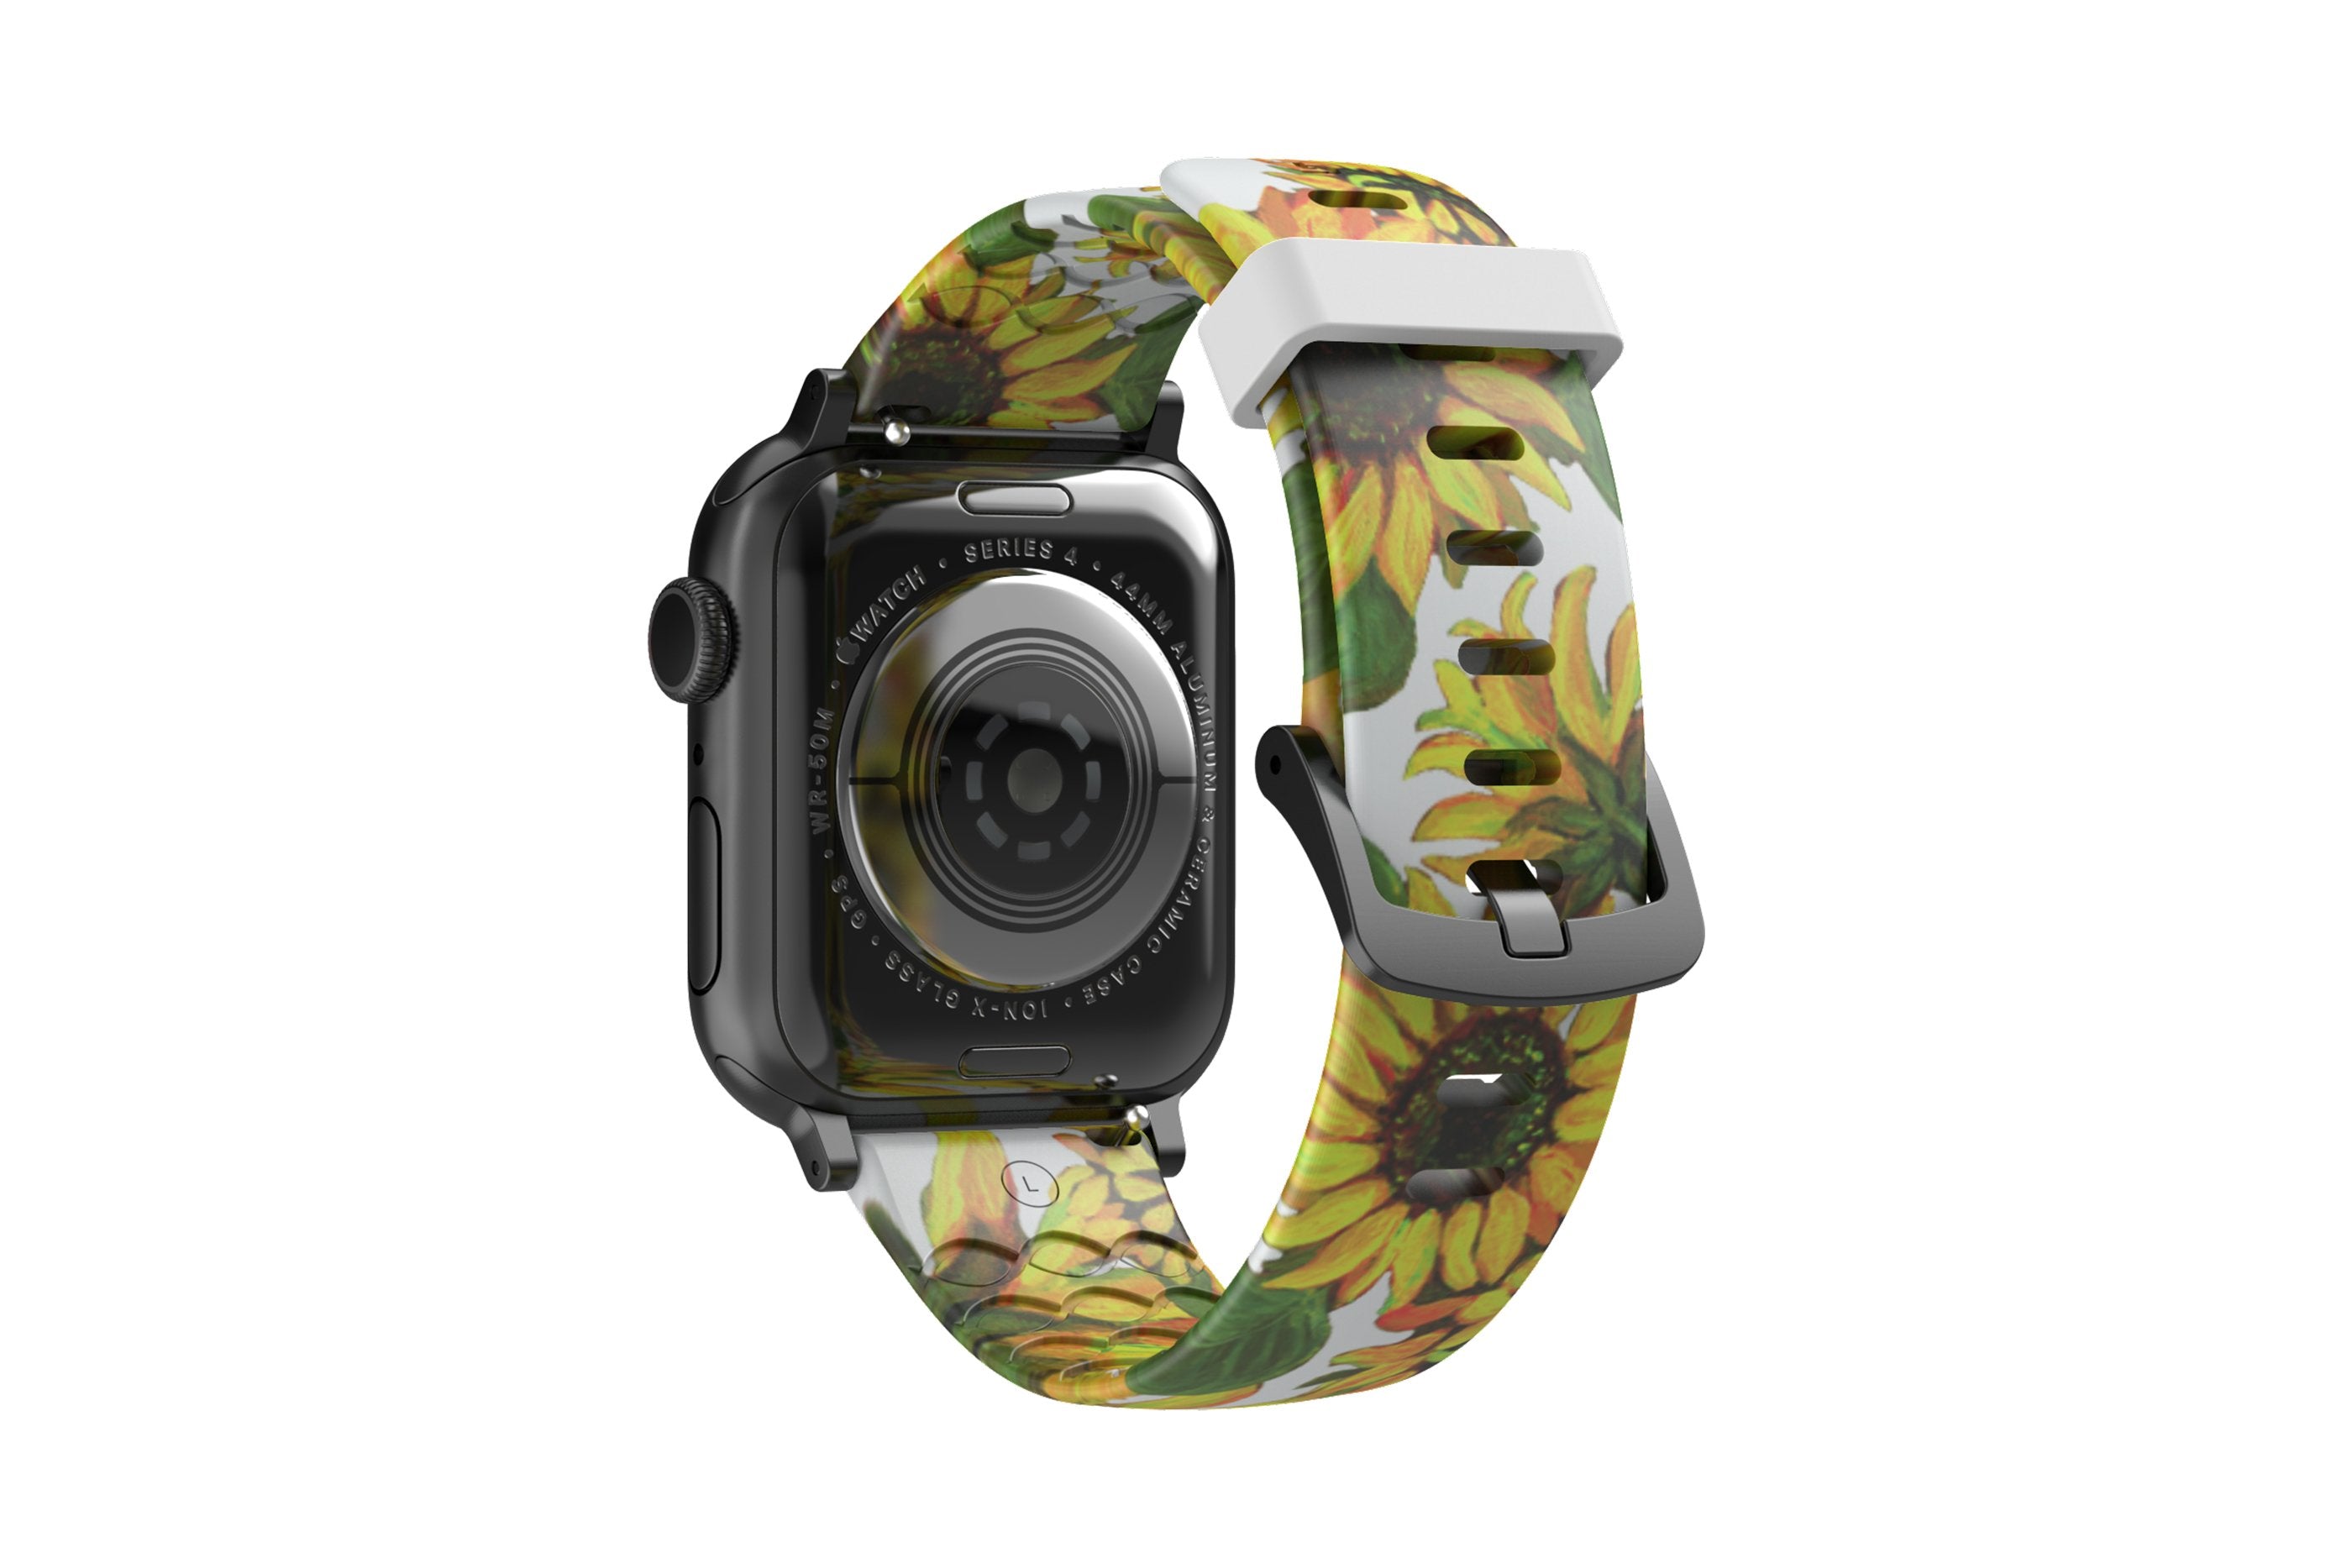 Sunflower Apple Watch Band with gray hardware viewed from top down